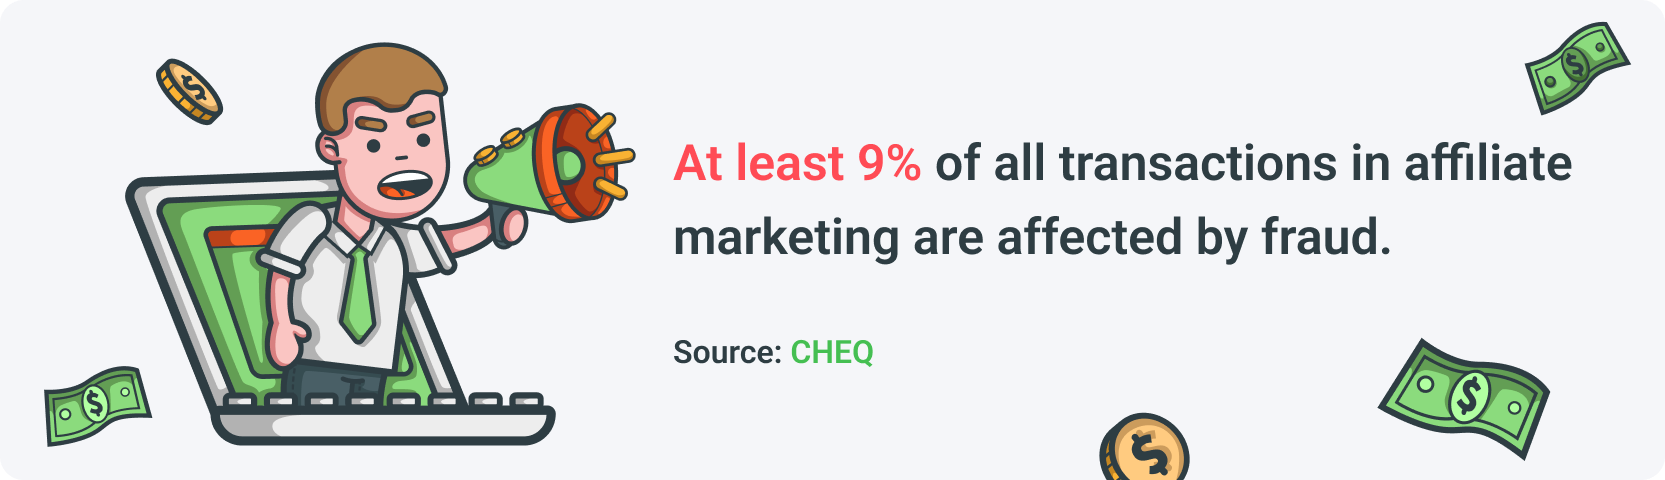 According to CHEQ, at least 9% of all transactions in affiliate marketing are affected by fraud.